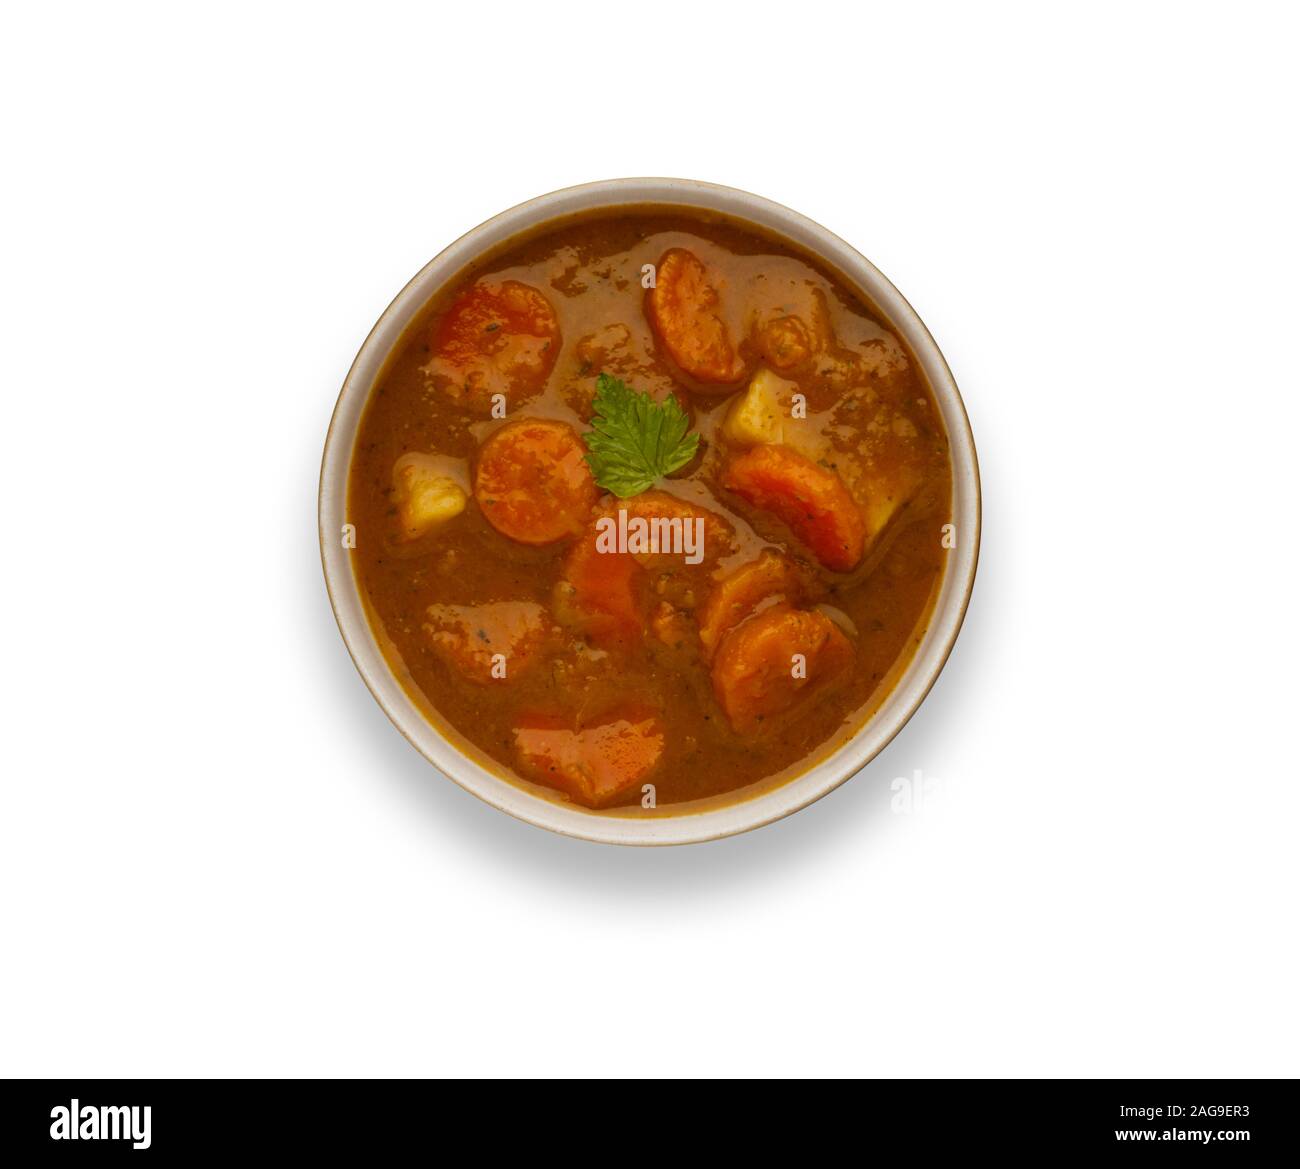 Isolated image of a bowl of delicious hearty winter vegetable soup, in a rustic bowl, with a drop shadow. Stock Photo